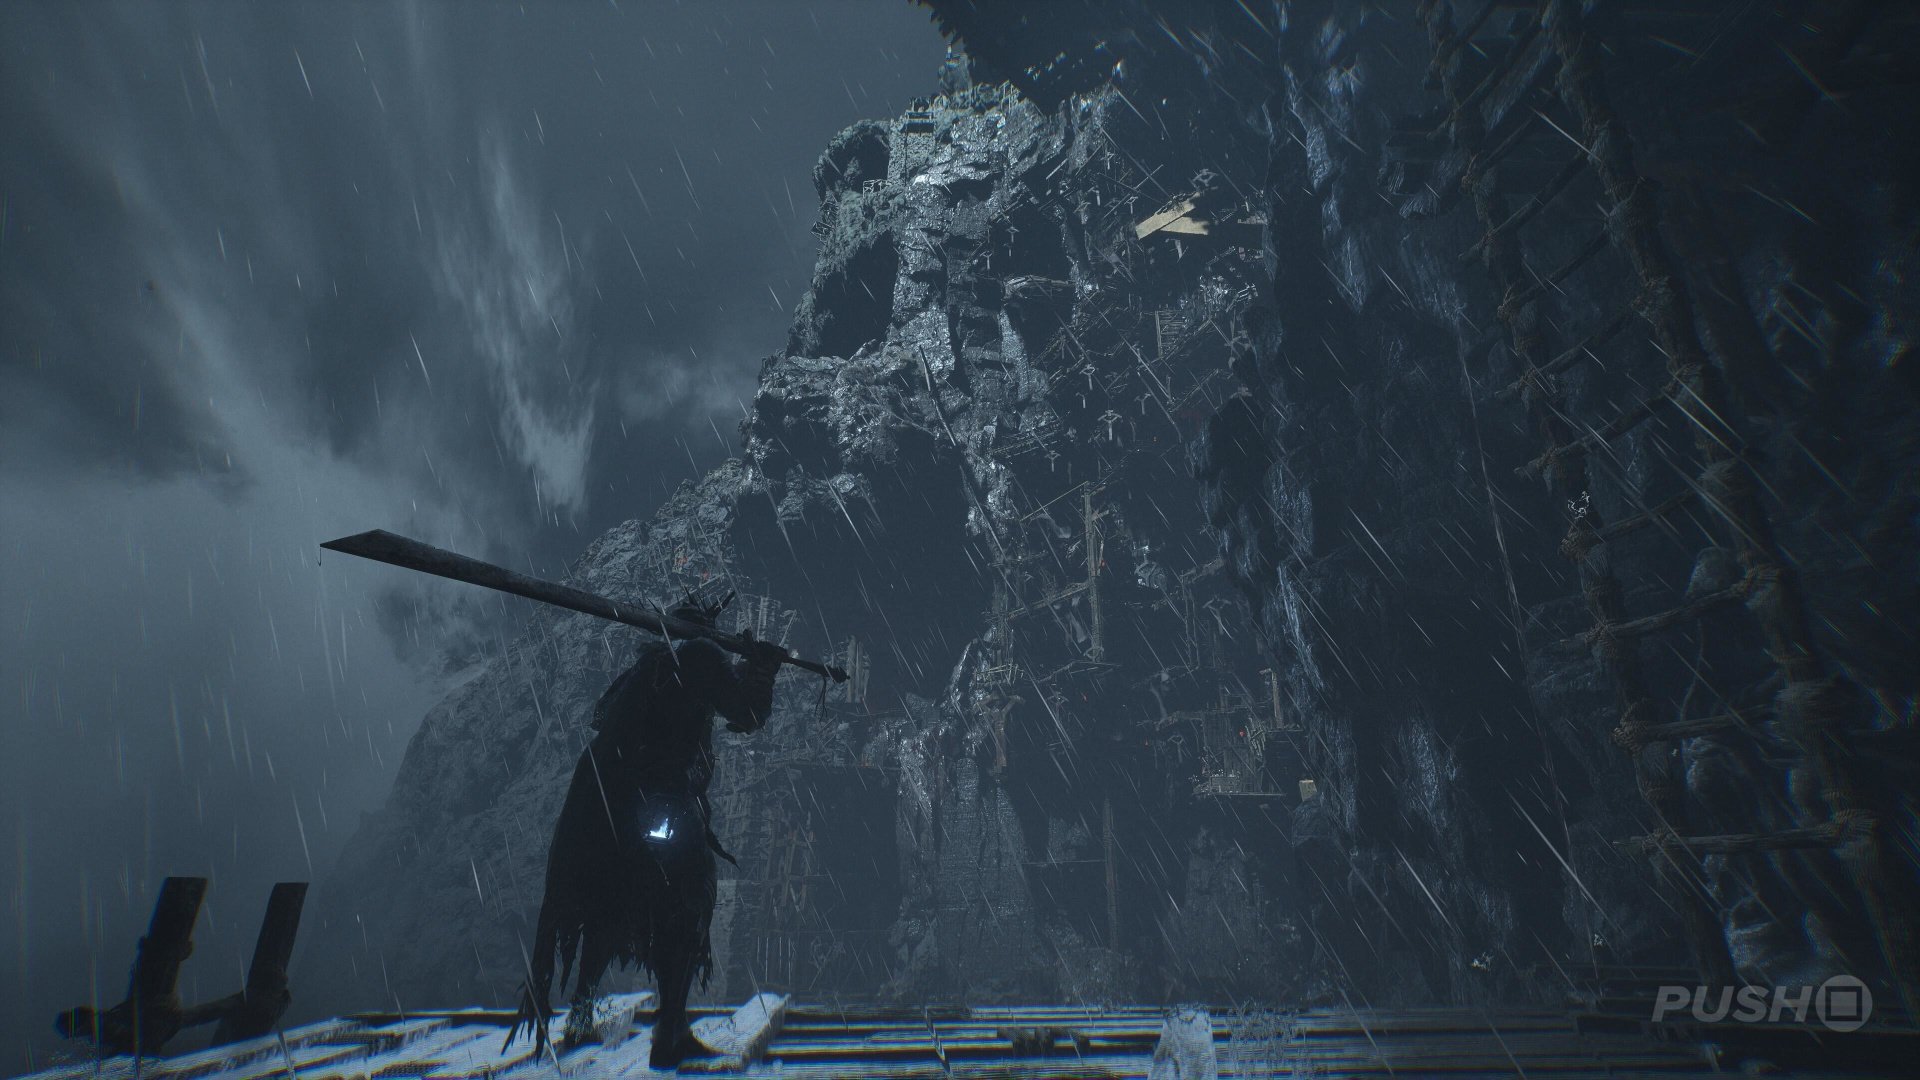 Lords Of The Fallen' Is Taking On 'Dark Souls,' But It Can't Quite